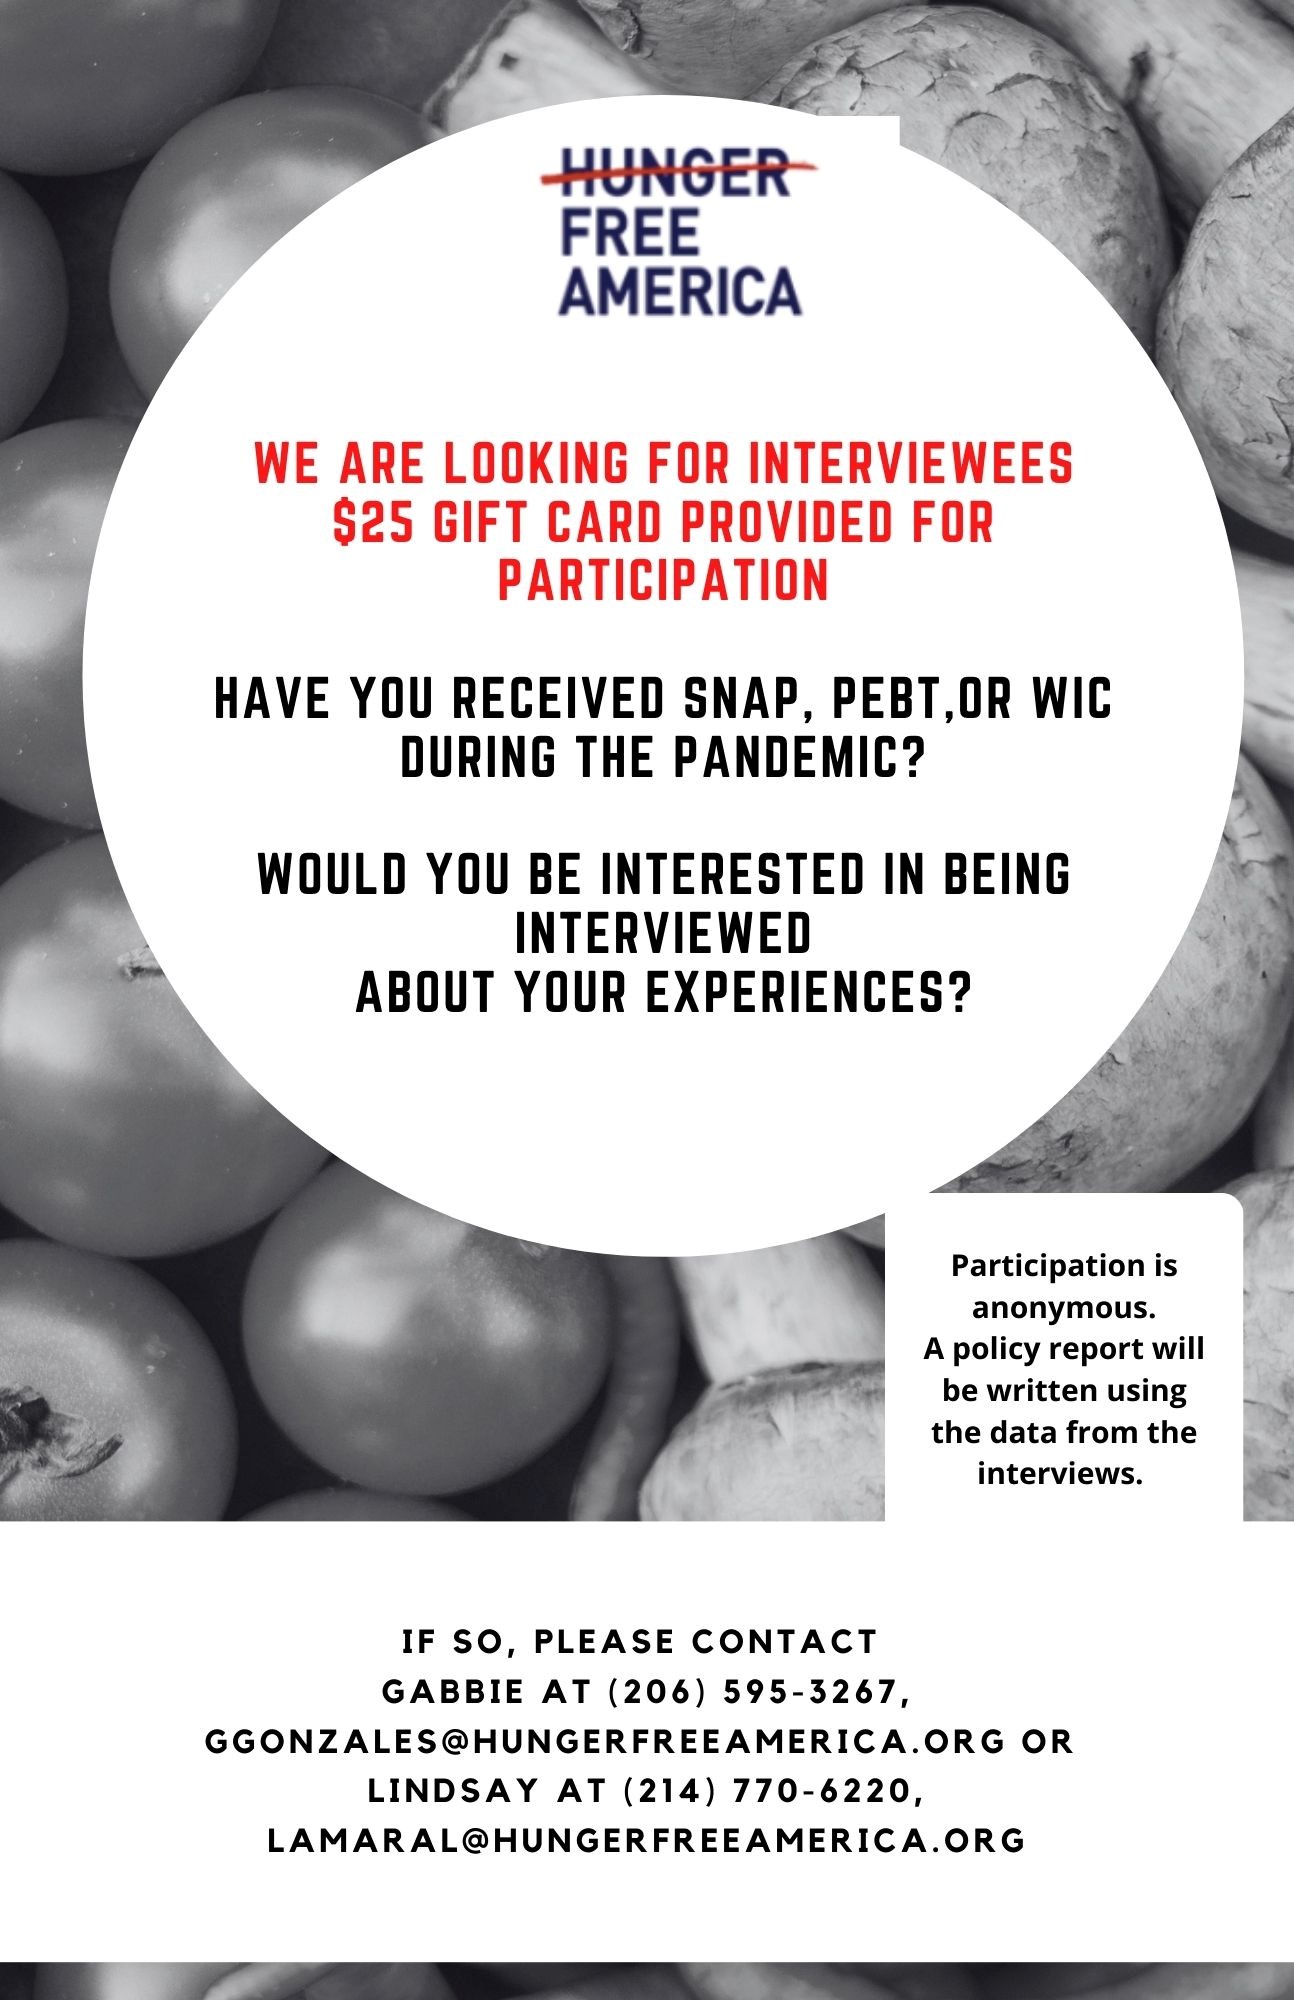 We are looking for interviewees